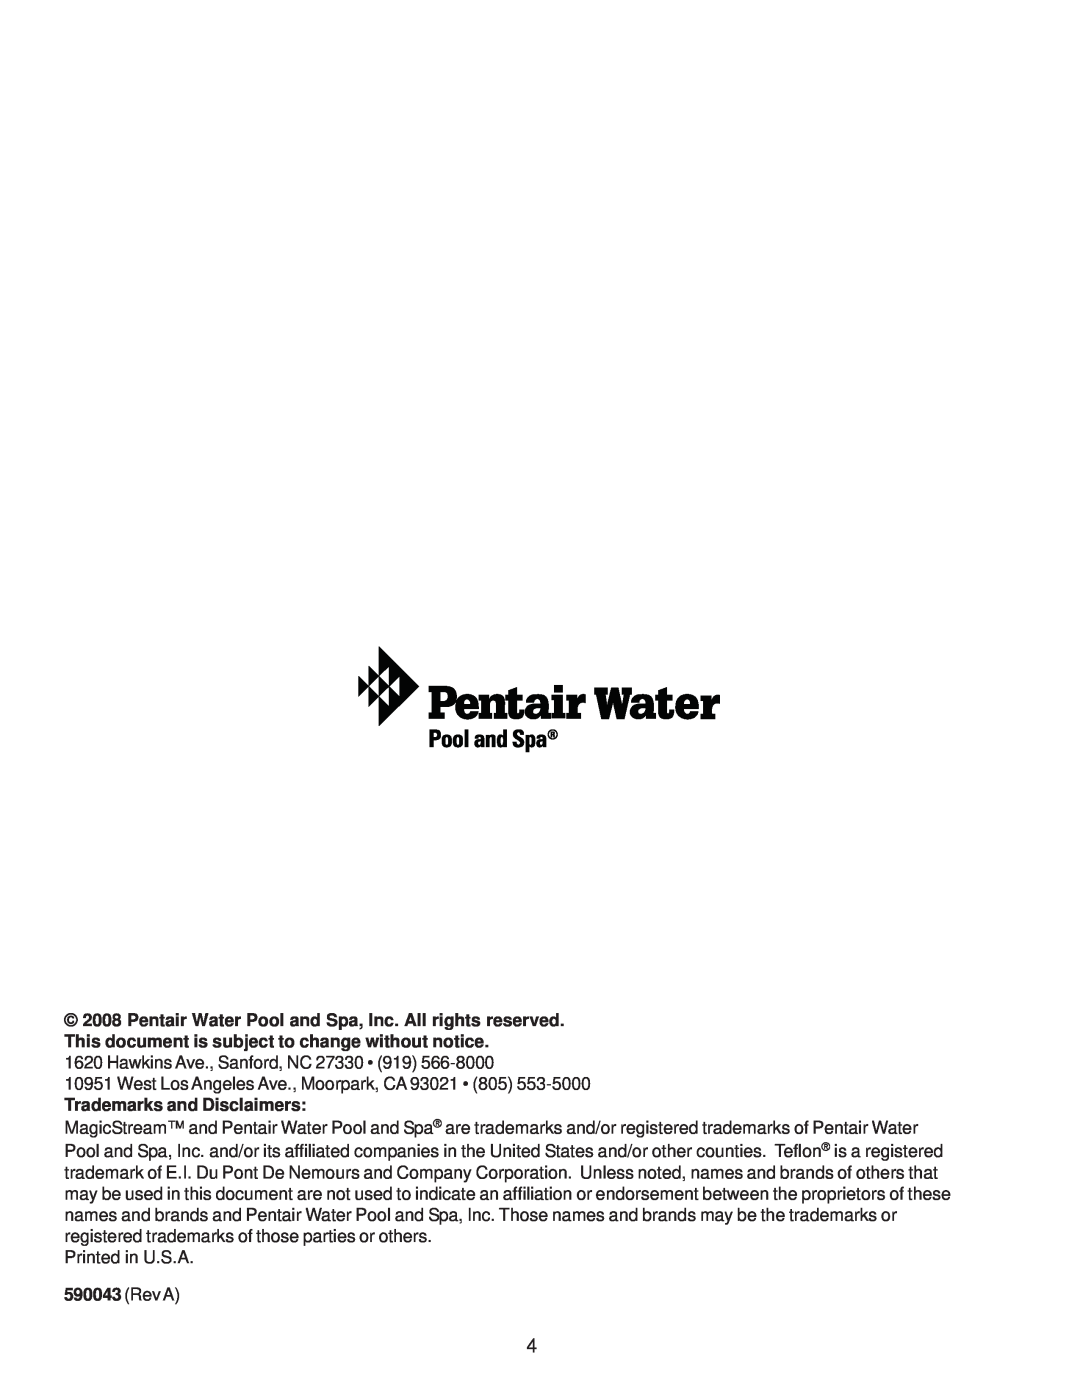 Pentair MagicStream installation instructions Trademarks and Disclaimers, Rev A 